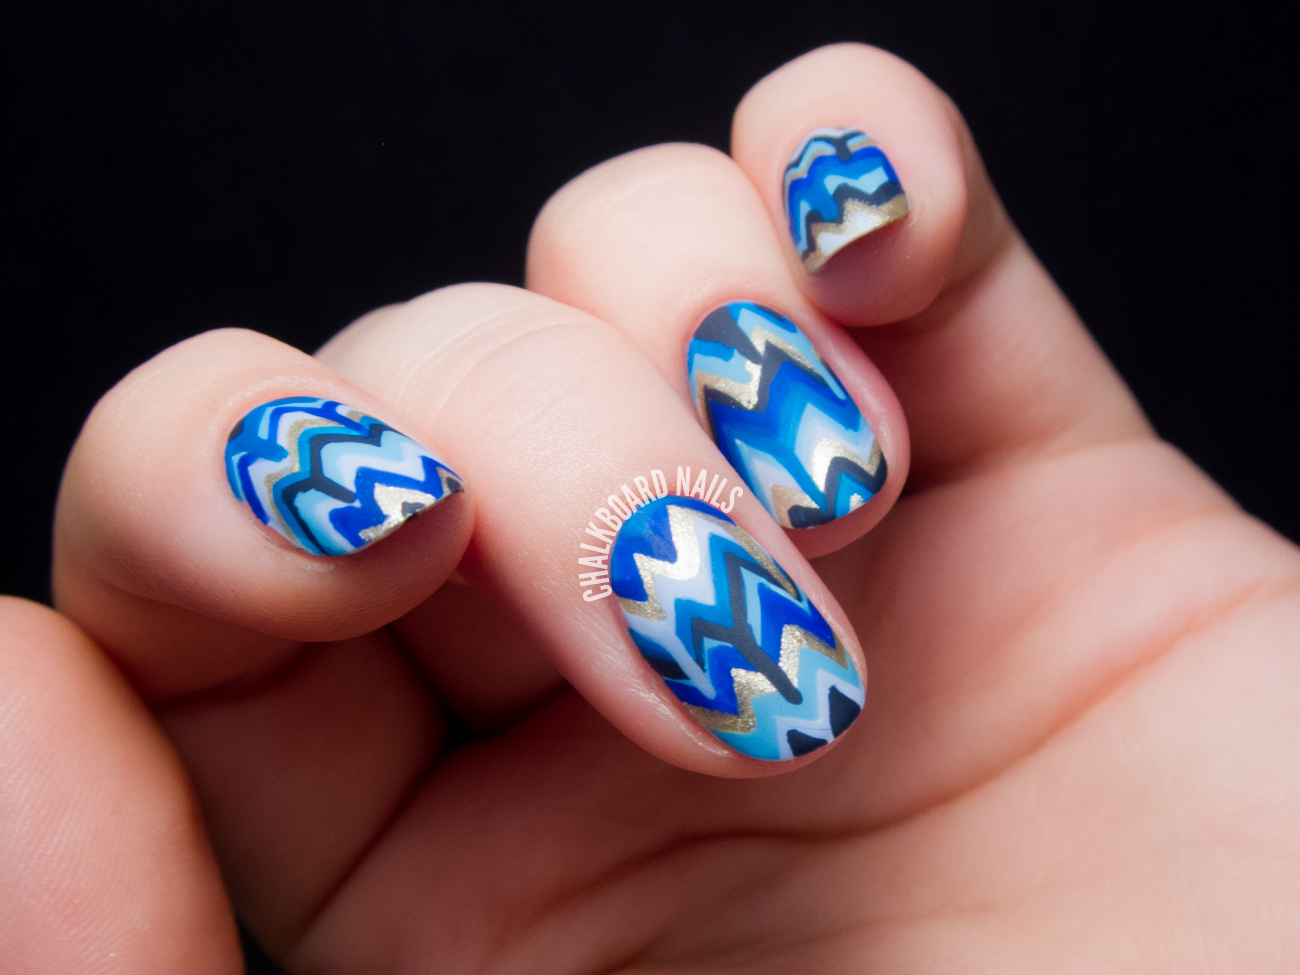 4. The Best Nail Polishes for Creating Chevron Lines - wide 8